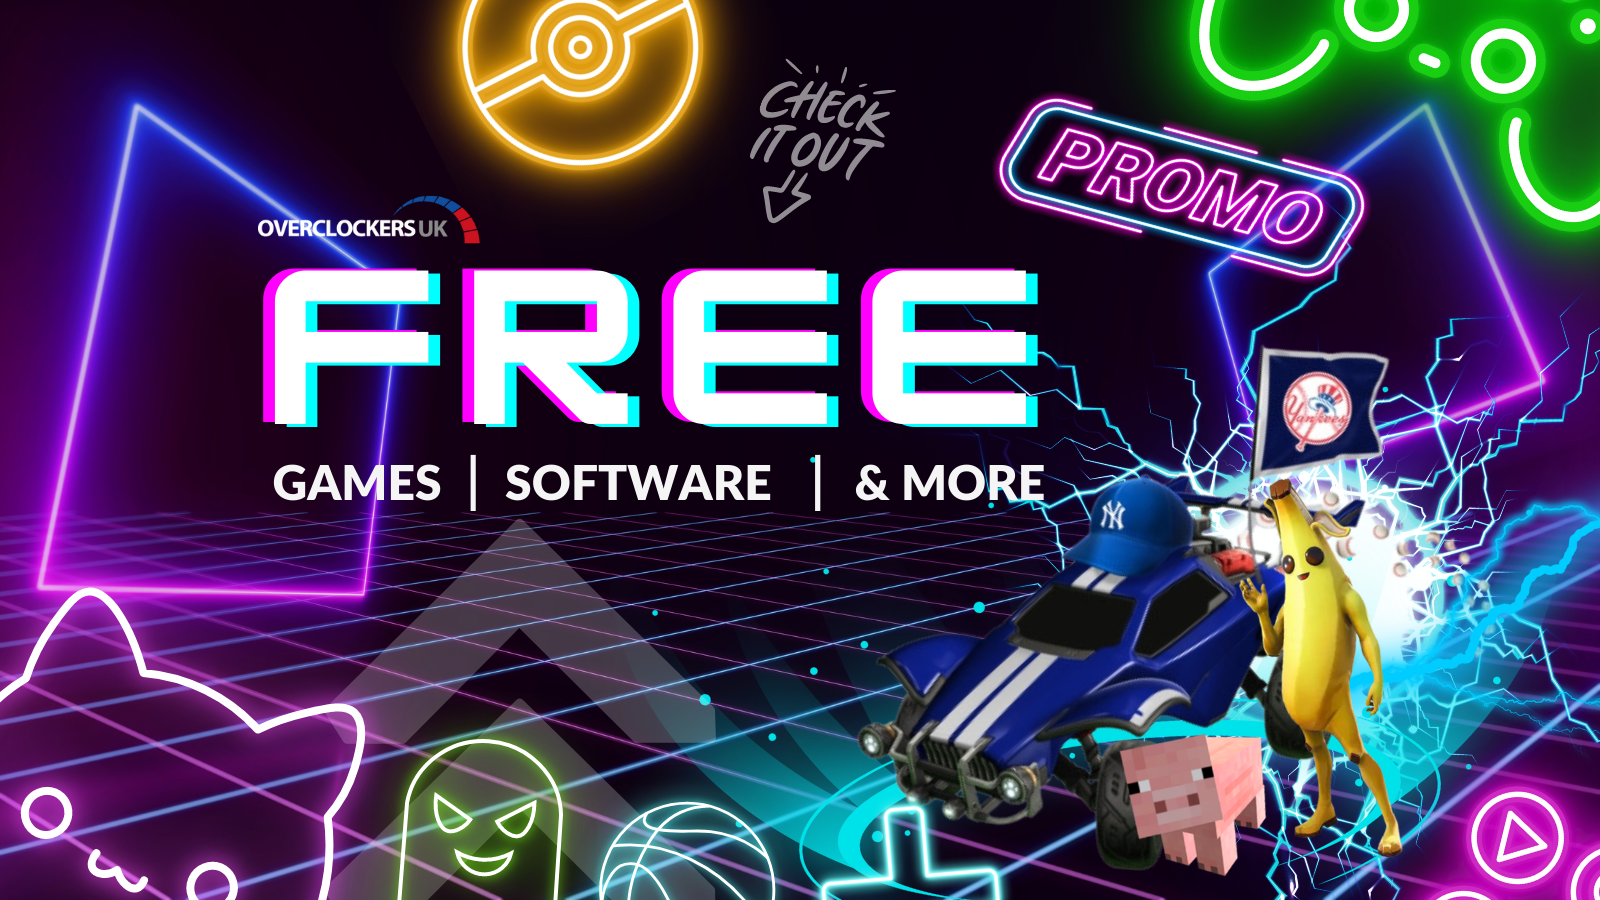 Warzone - FREE Flight School Bundle! How To Get PRIME GAMING Warzone  Content FOR FREE! 